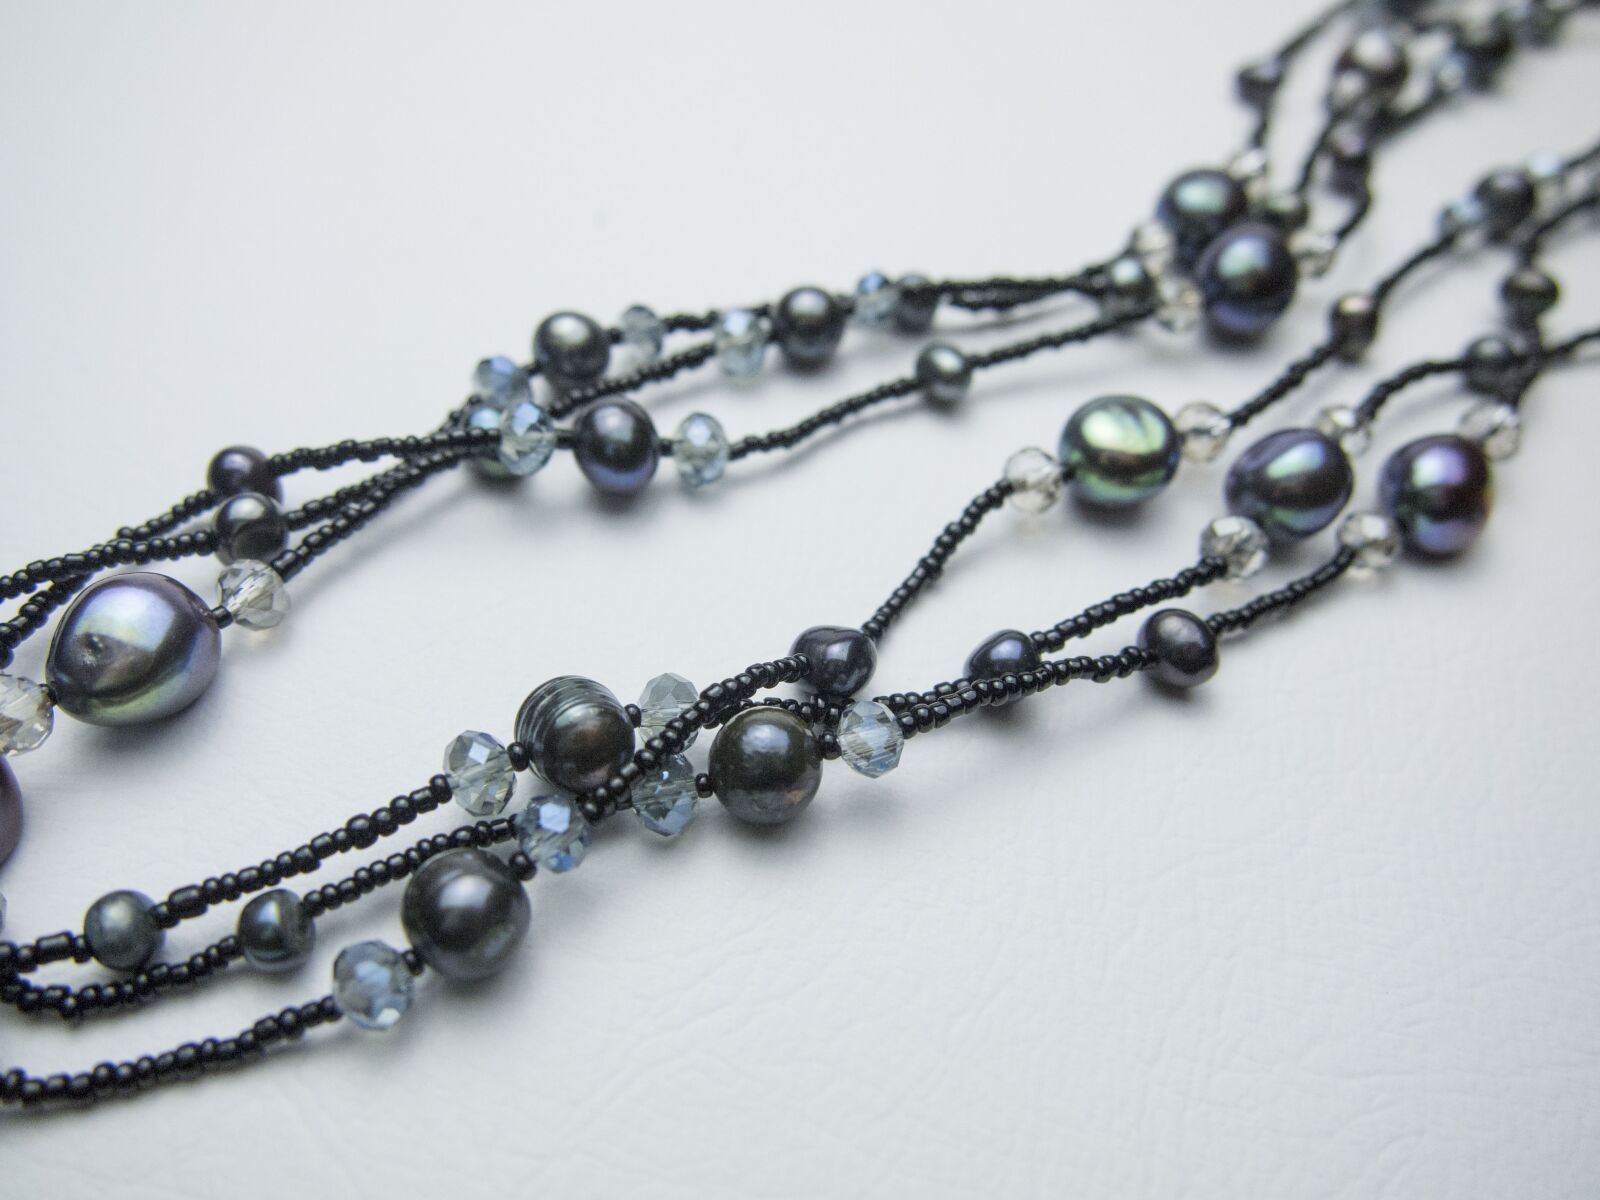 Olympus PEN E-PL2 sample photo. Freshwater pearl, necklace, accessories photography